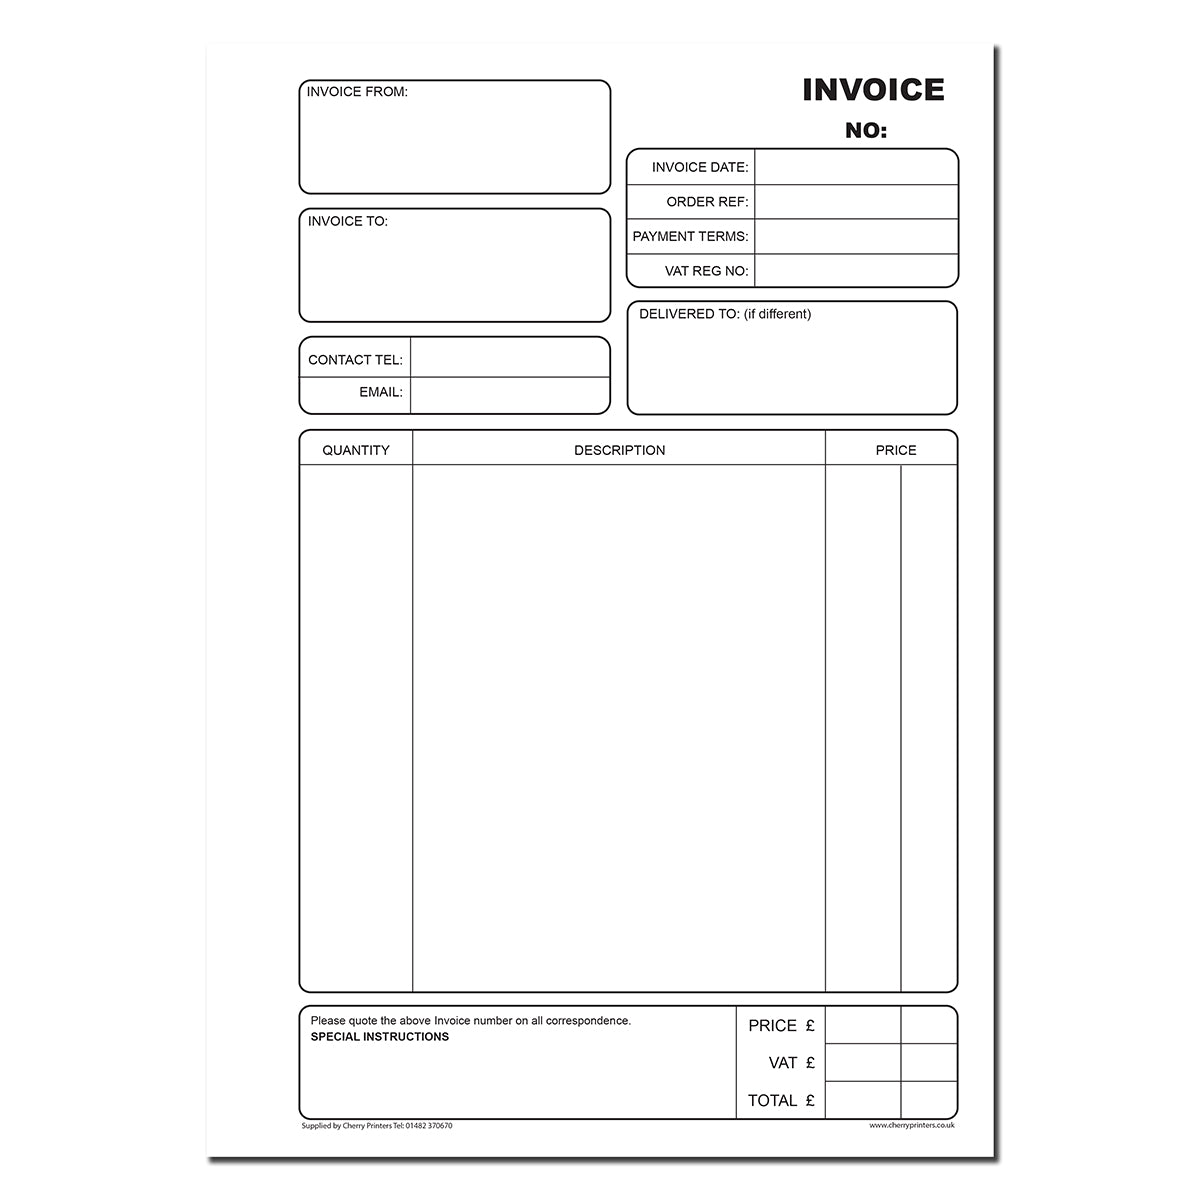 NCR Invoice Duplicate Book A4 Numbered 01-50